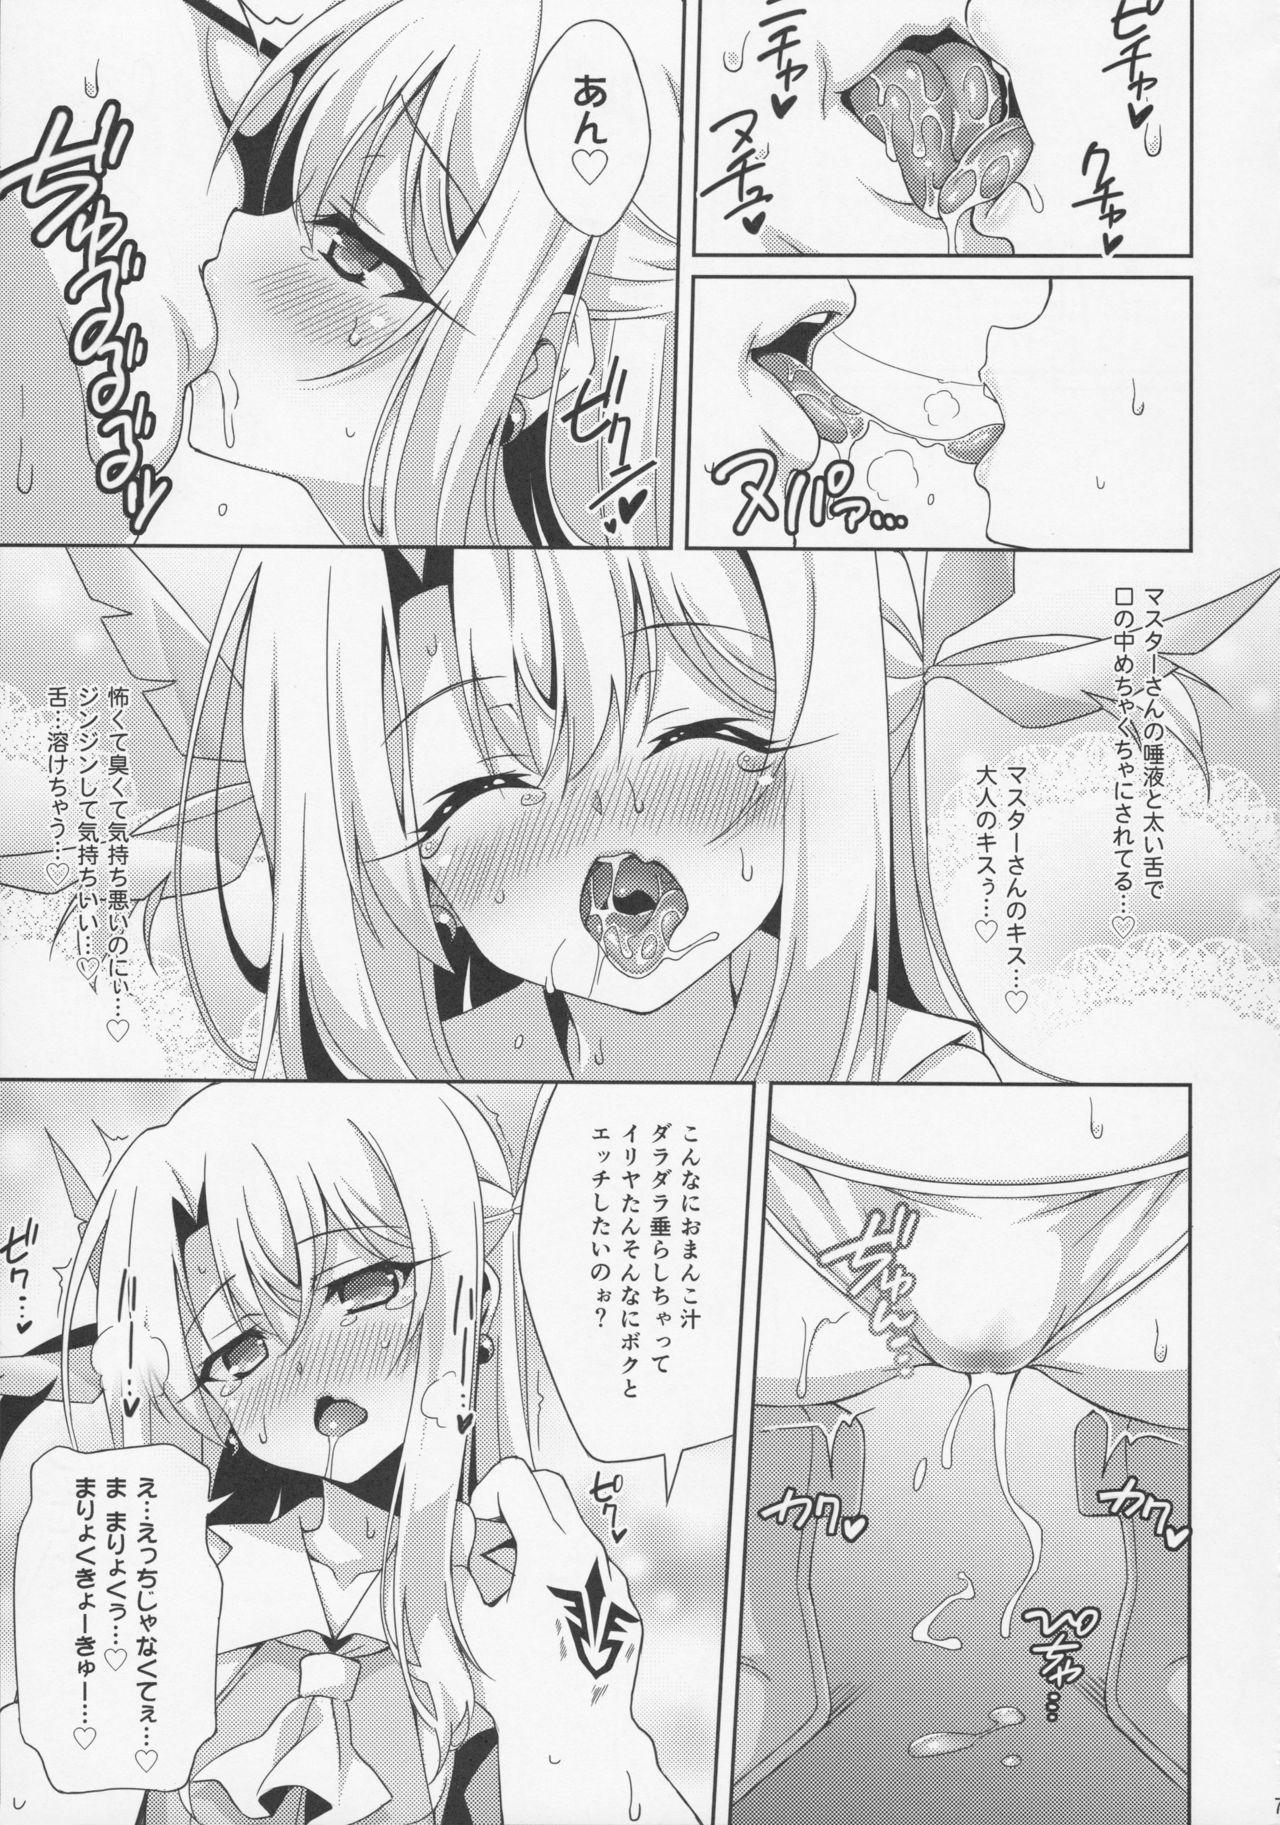 Lez Illya-chan to Love Love Reijyux - Fate grand order Fate kaleid liner prisma illya Amature - Page 10